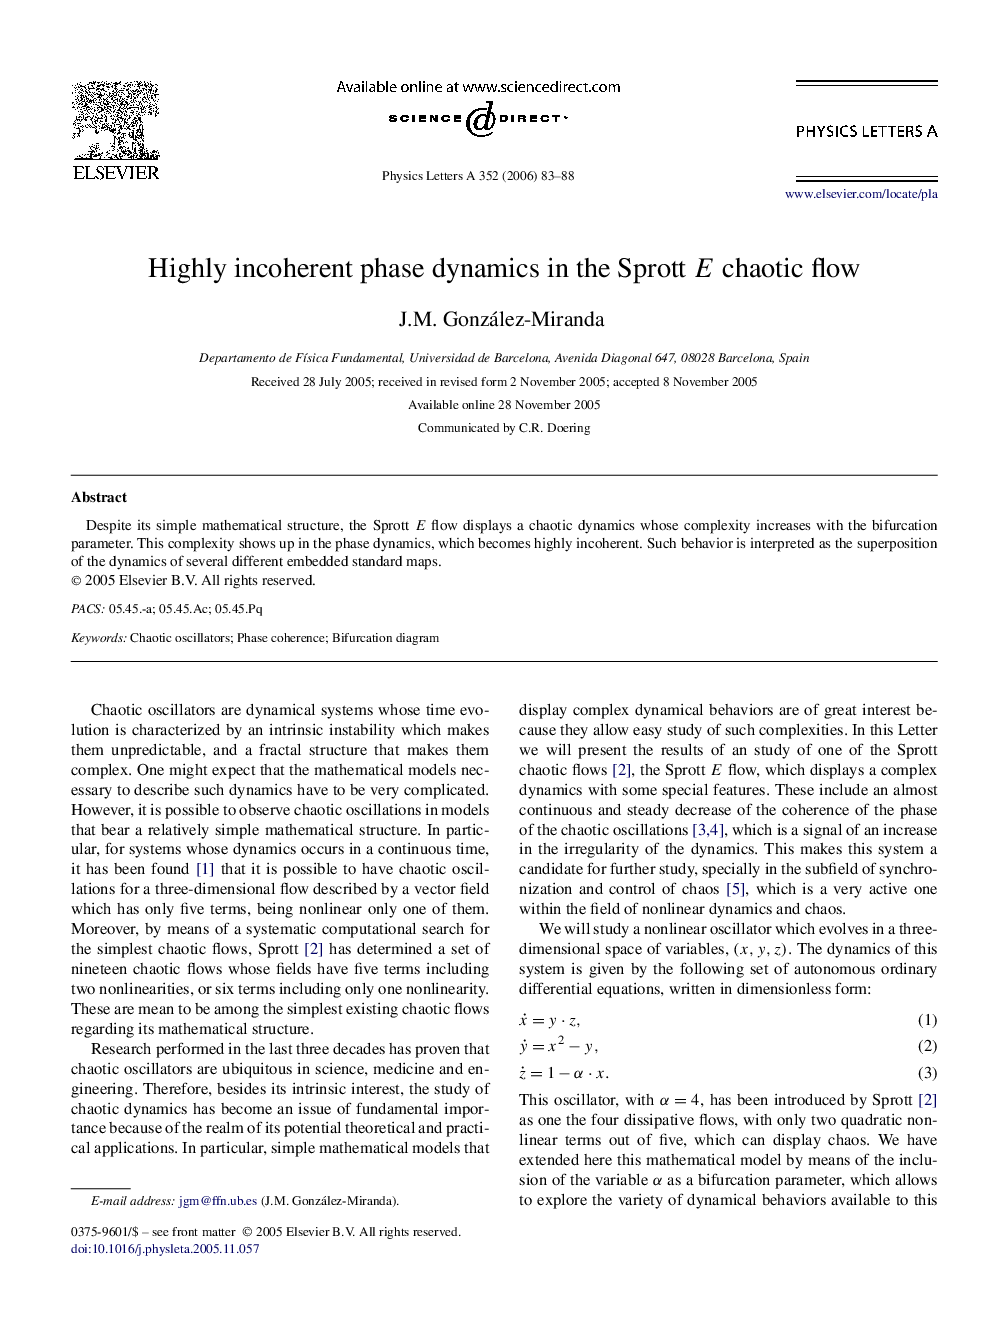 Highly incoherent phase dynamics in the Sprott E chaotic flow